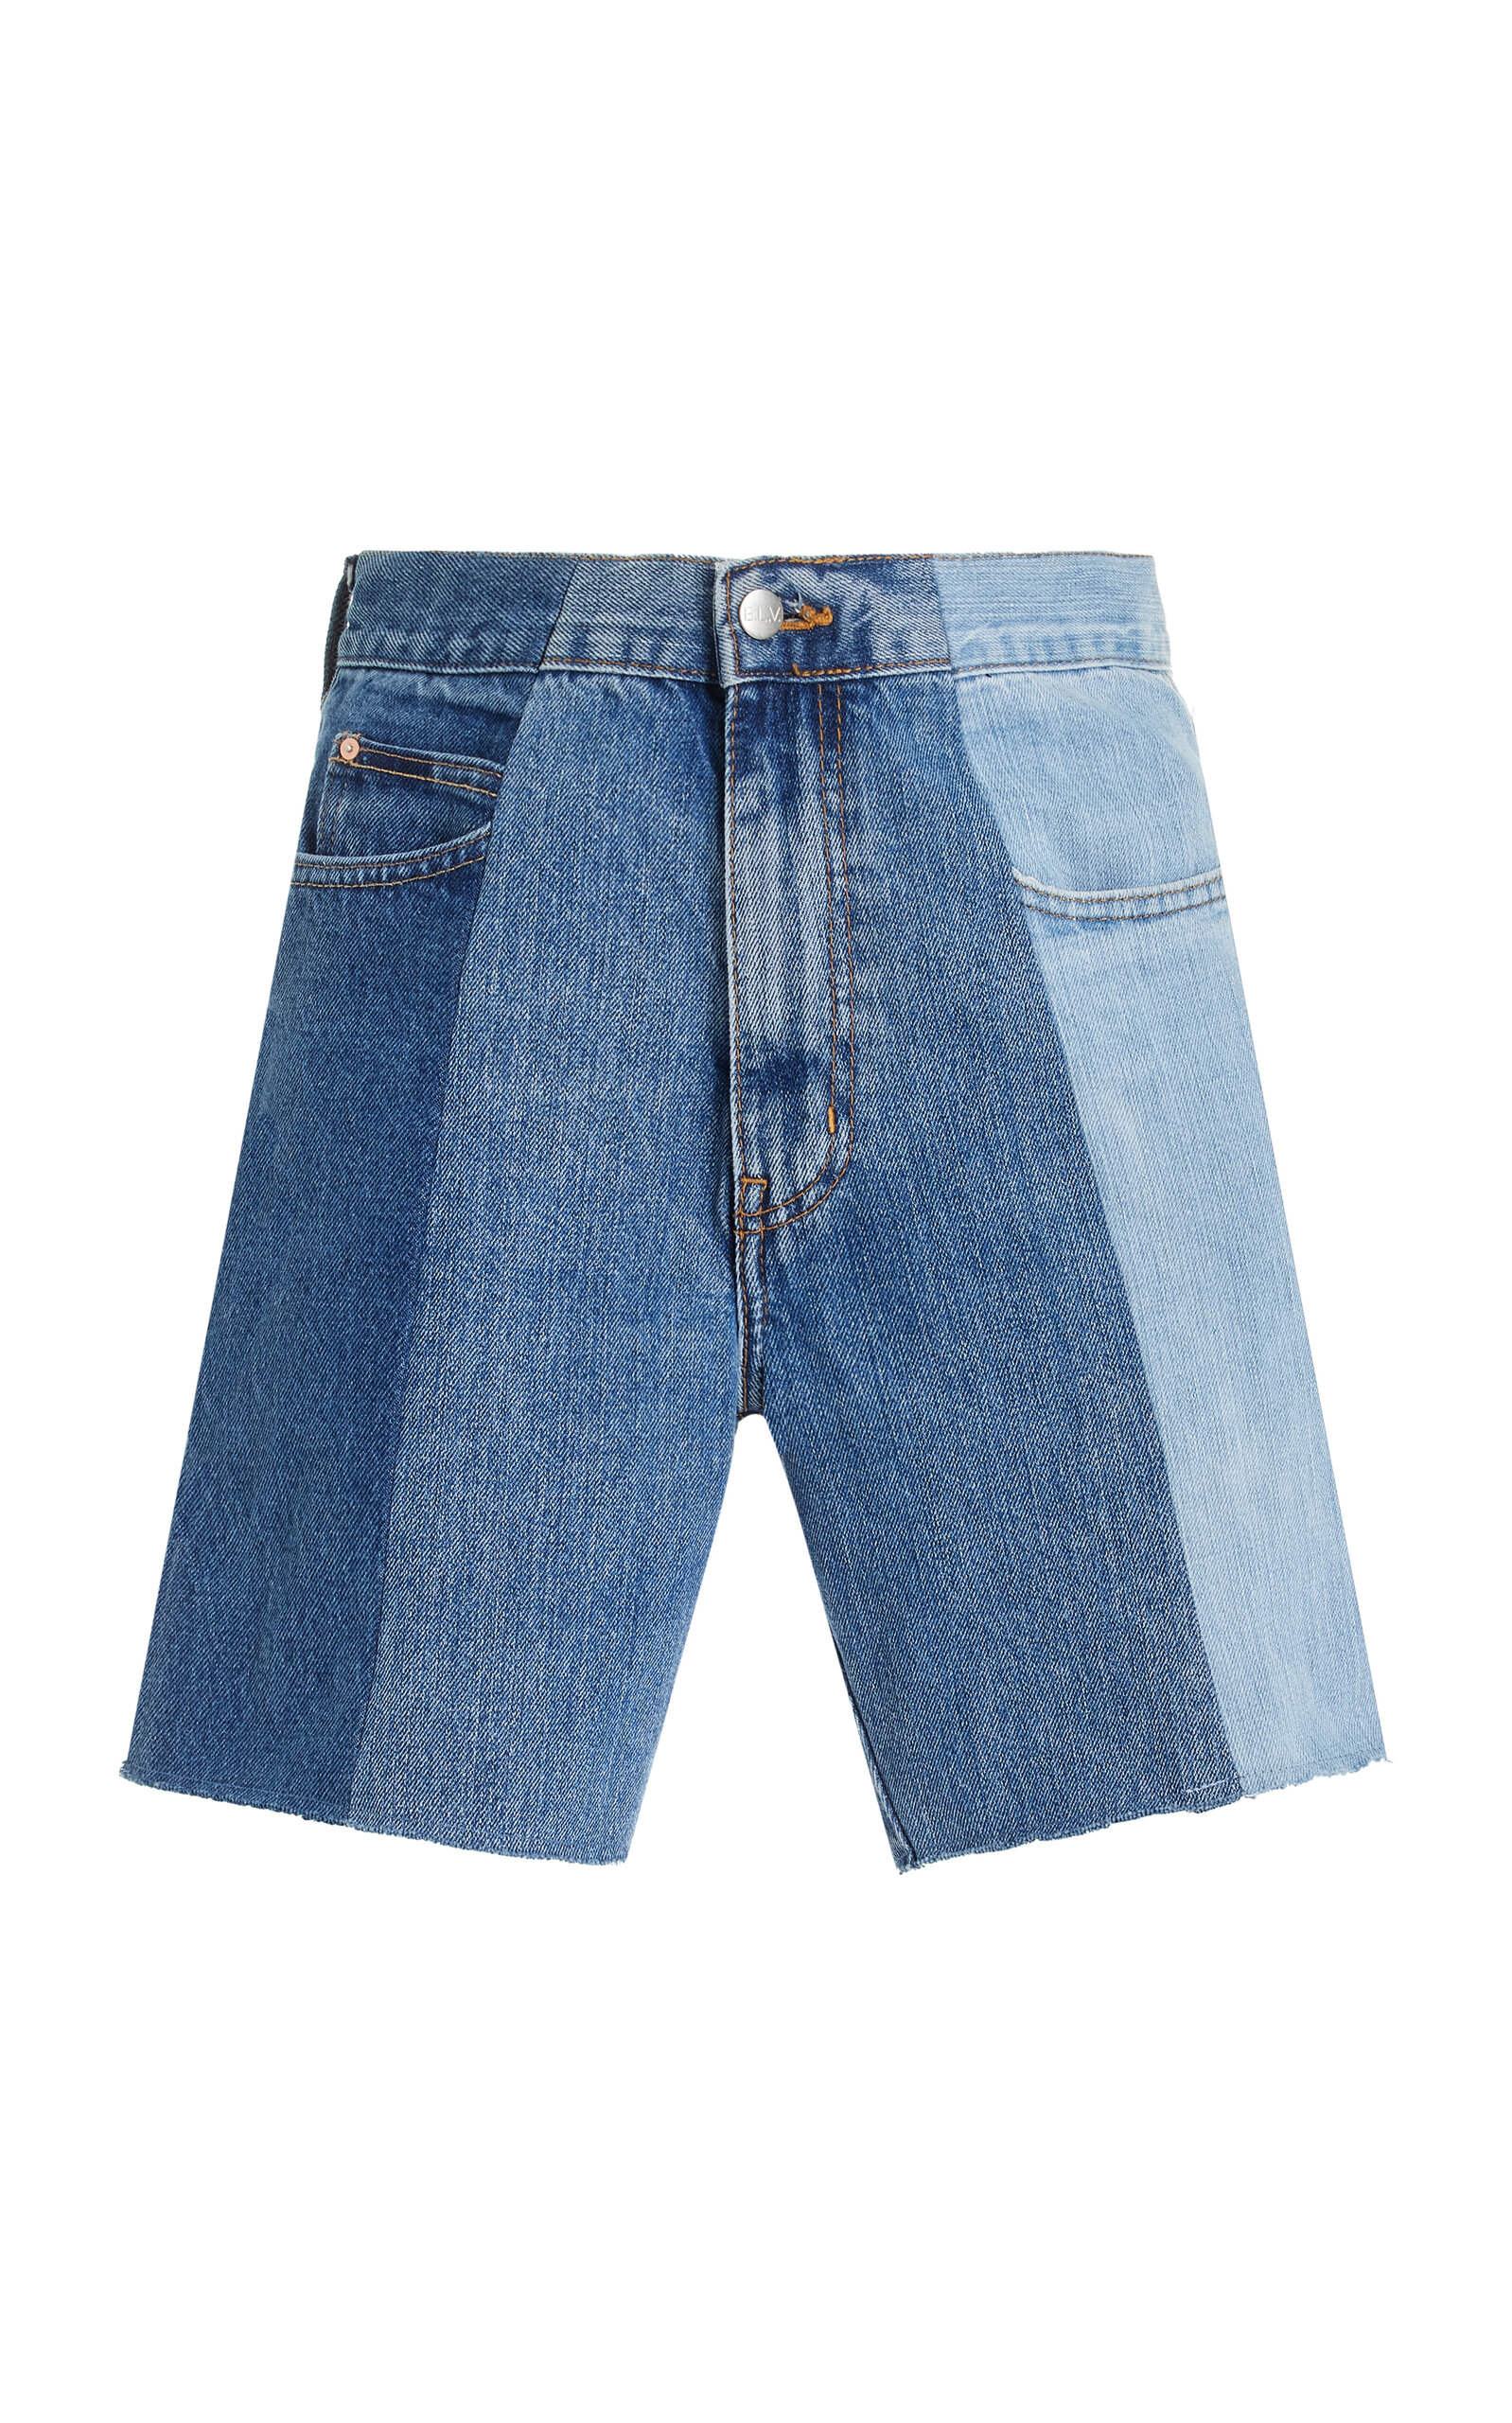 Stovepipe Patchwork Denim Shorts